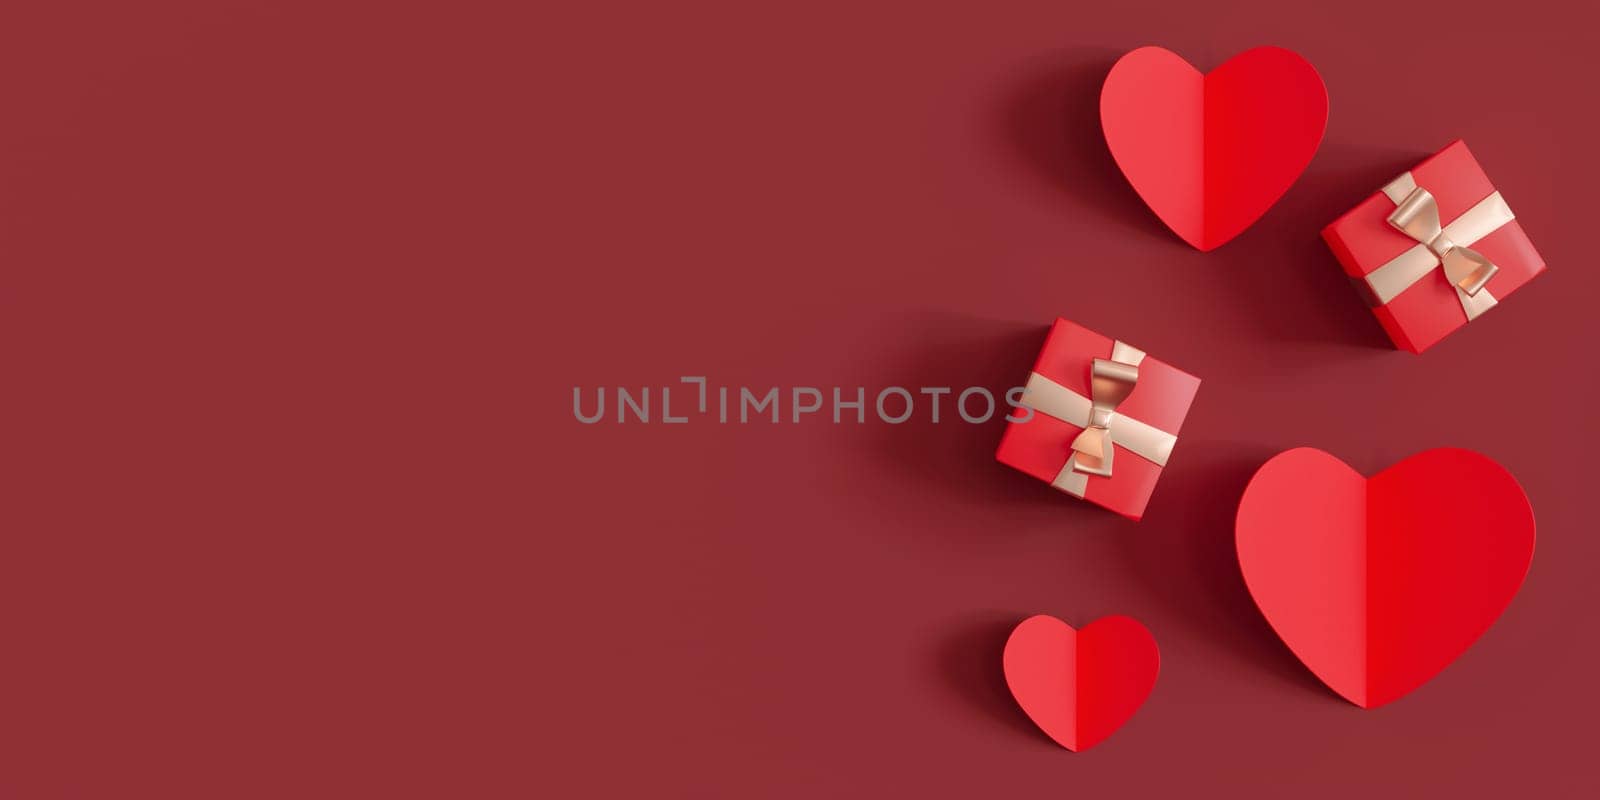 Dark red background with hearts, presents and copy space. Valentine's Day, Wedding backdrop. Empty space for advertising text, invitation, logo. Postcard, greeting card design. Love symbol. 3D render. by creativebird